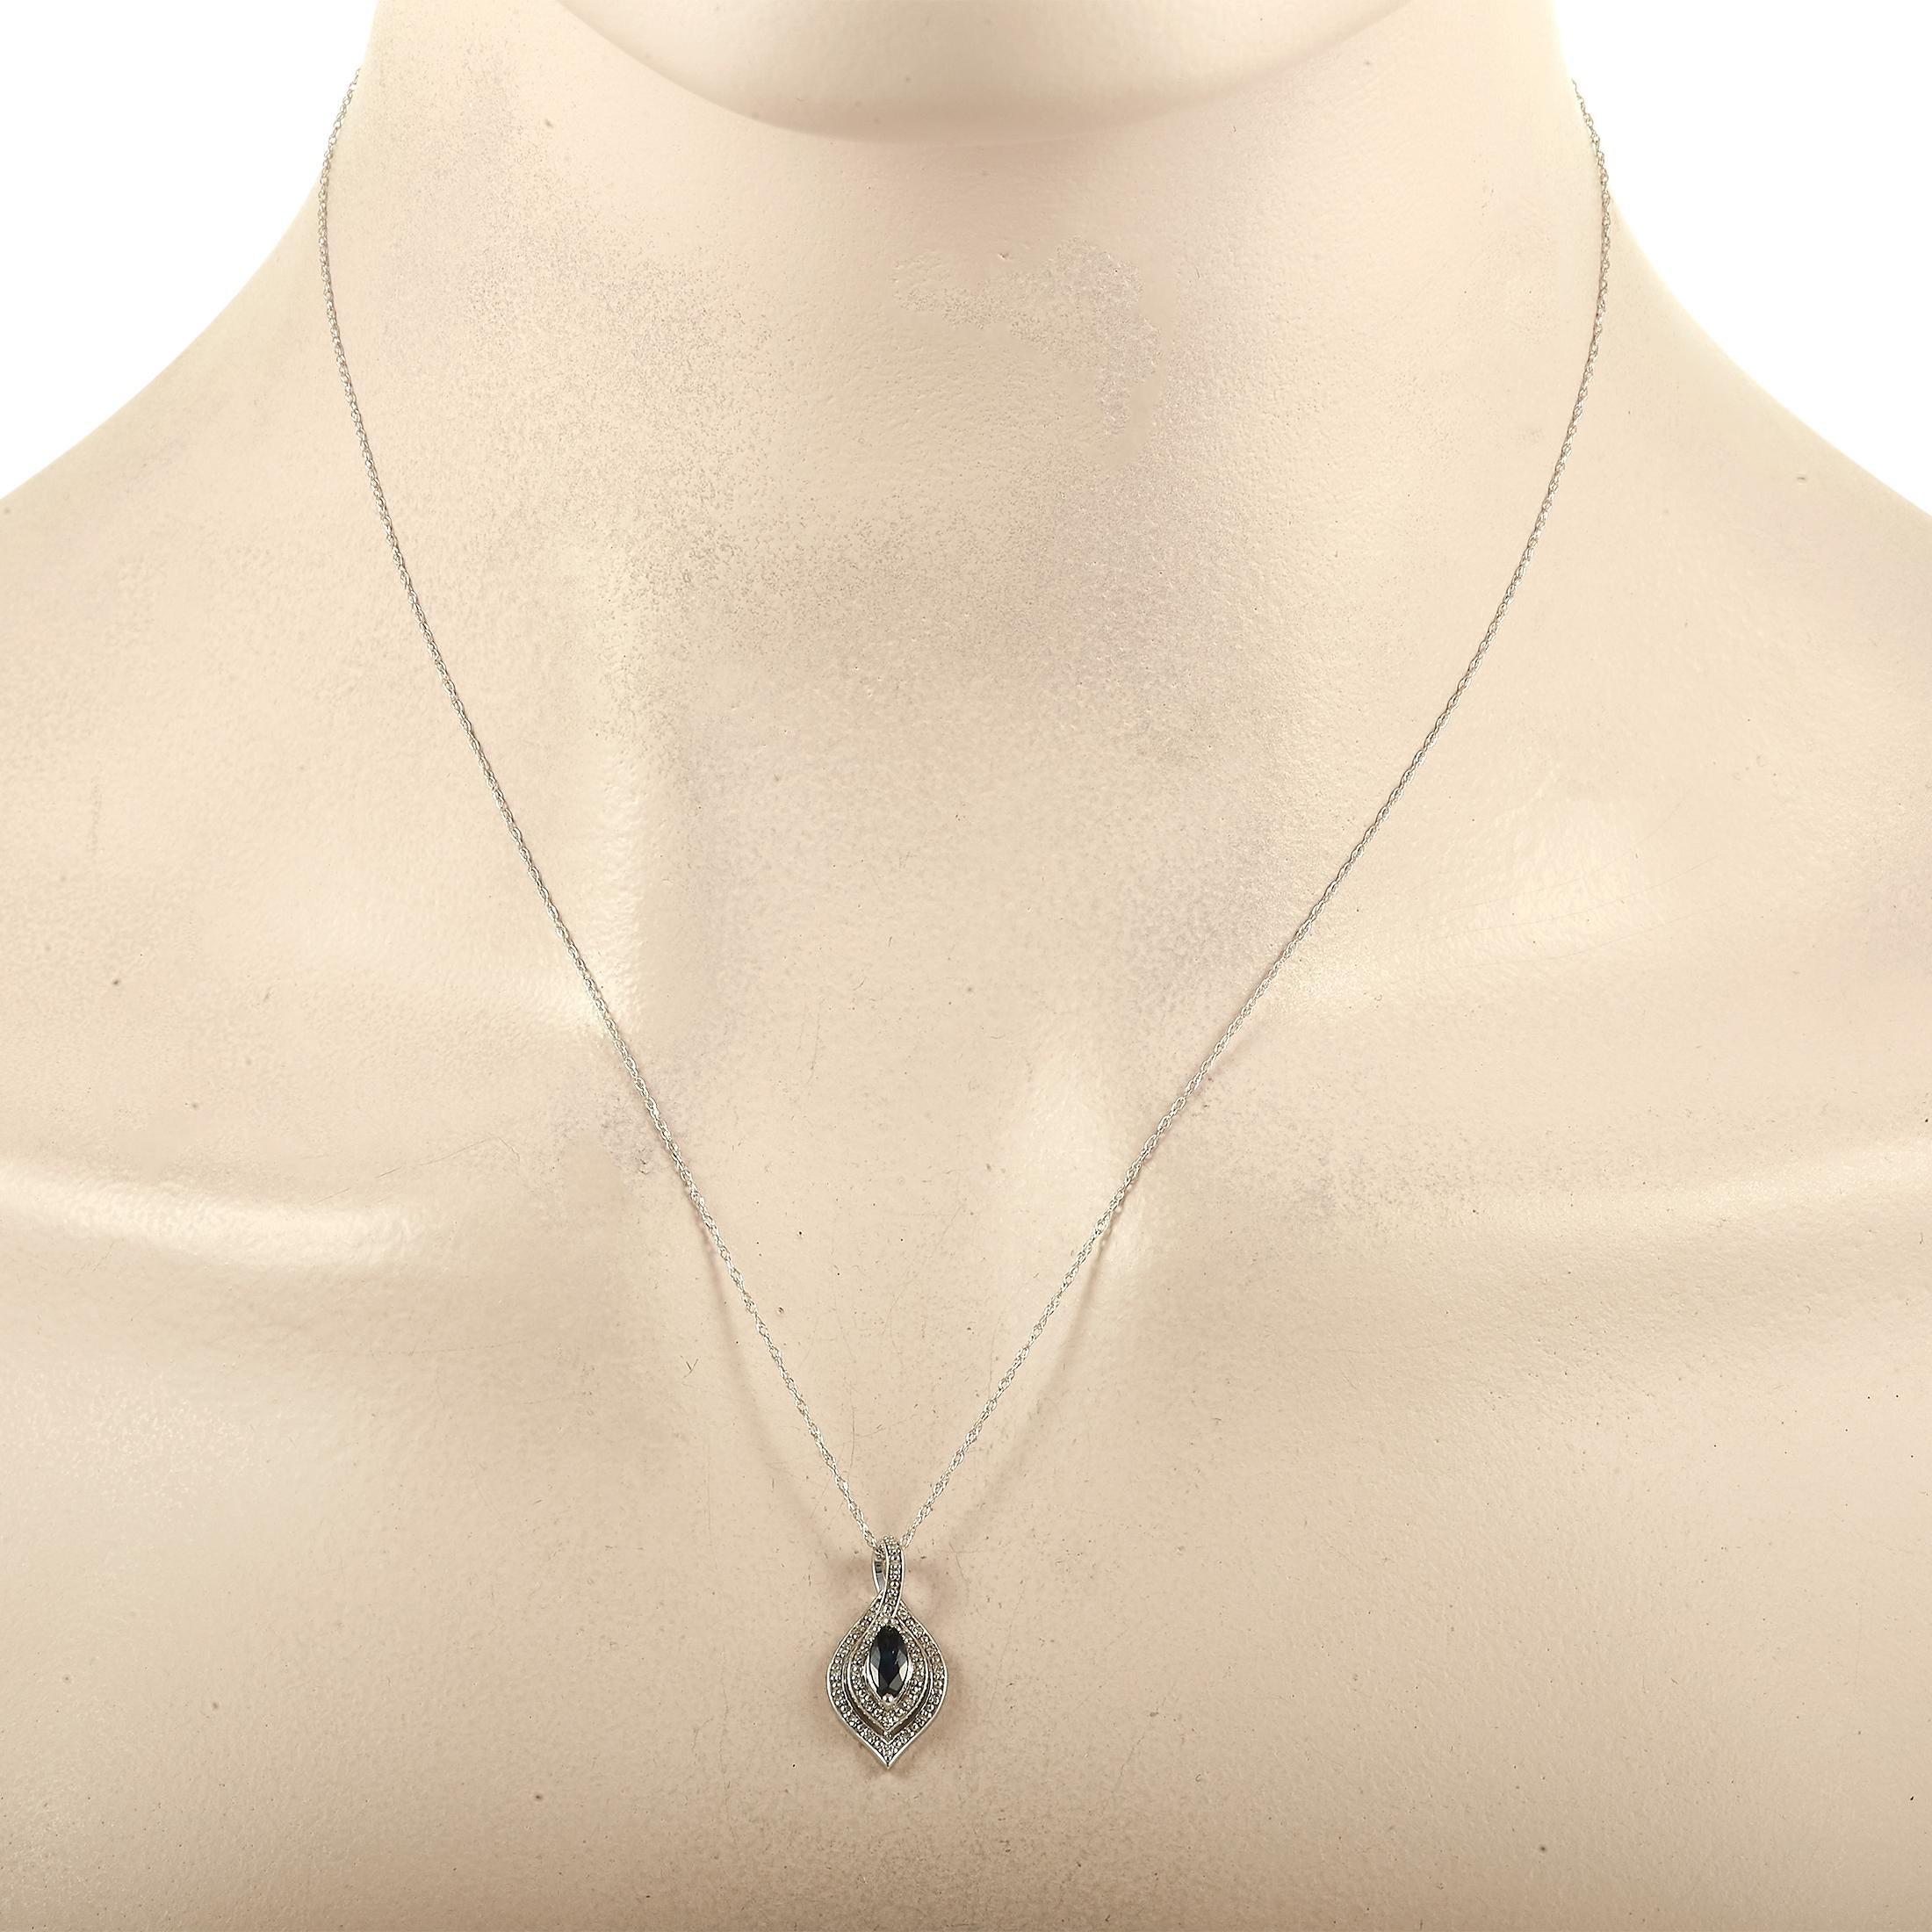 A classically elegant pendant measuring 0.75” long and 0.45” wide is suspended from a dainty 17.5” chain on this exceptional necklace. Crafted from 14K White Gold, it comes complete with a bold sapphire center stone and diamond accents totaling 0.08